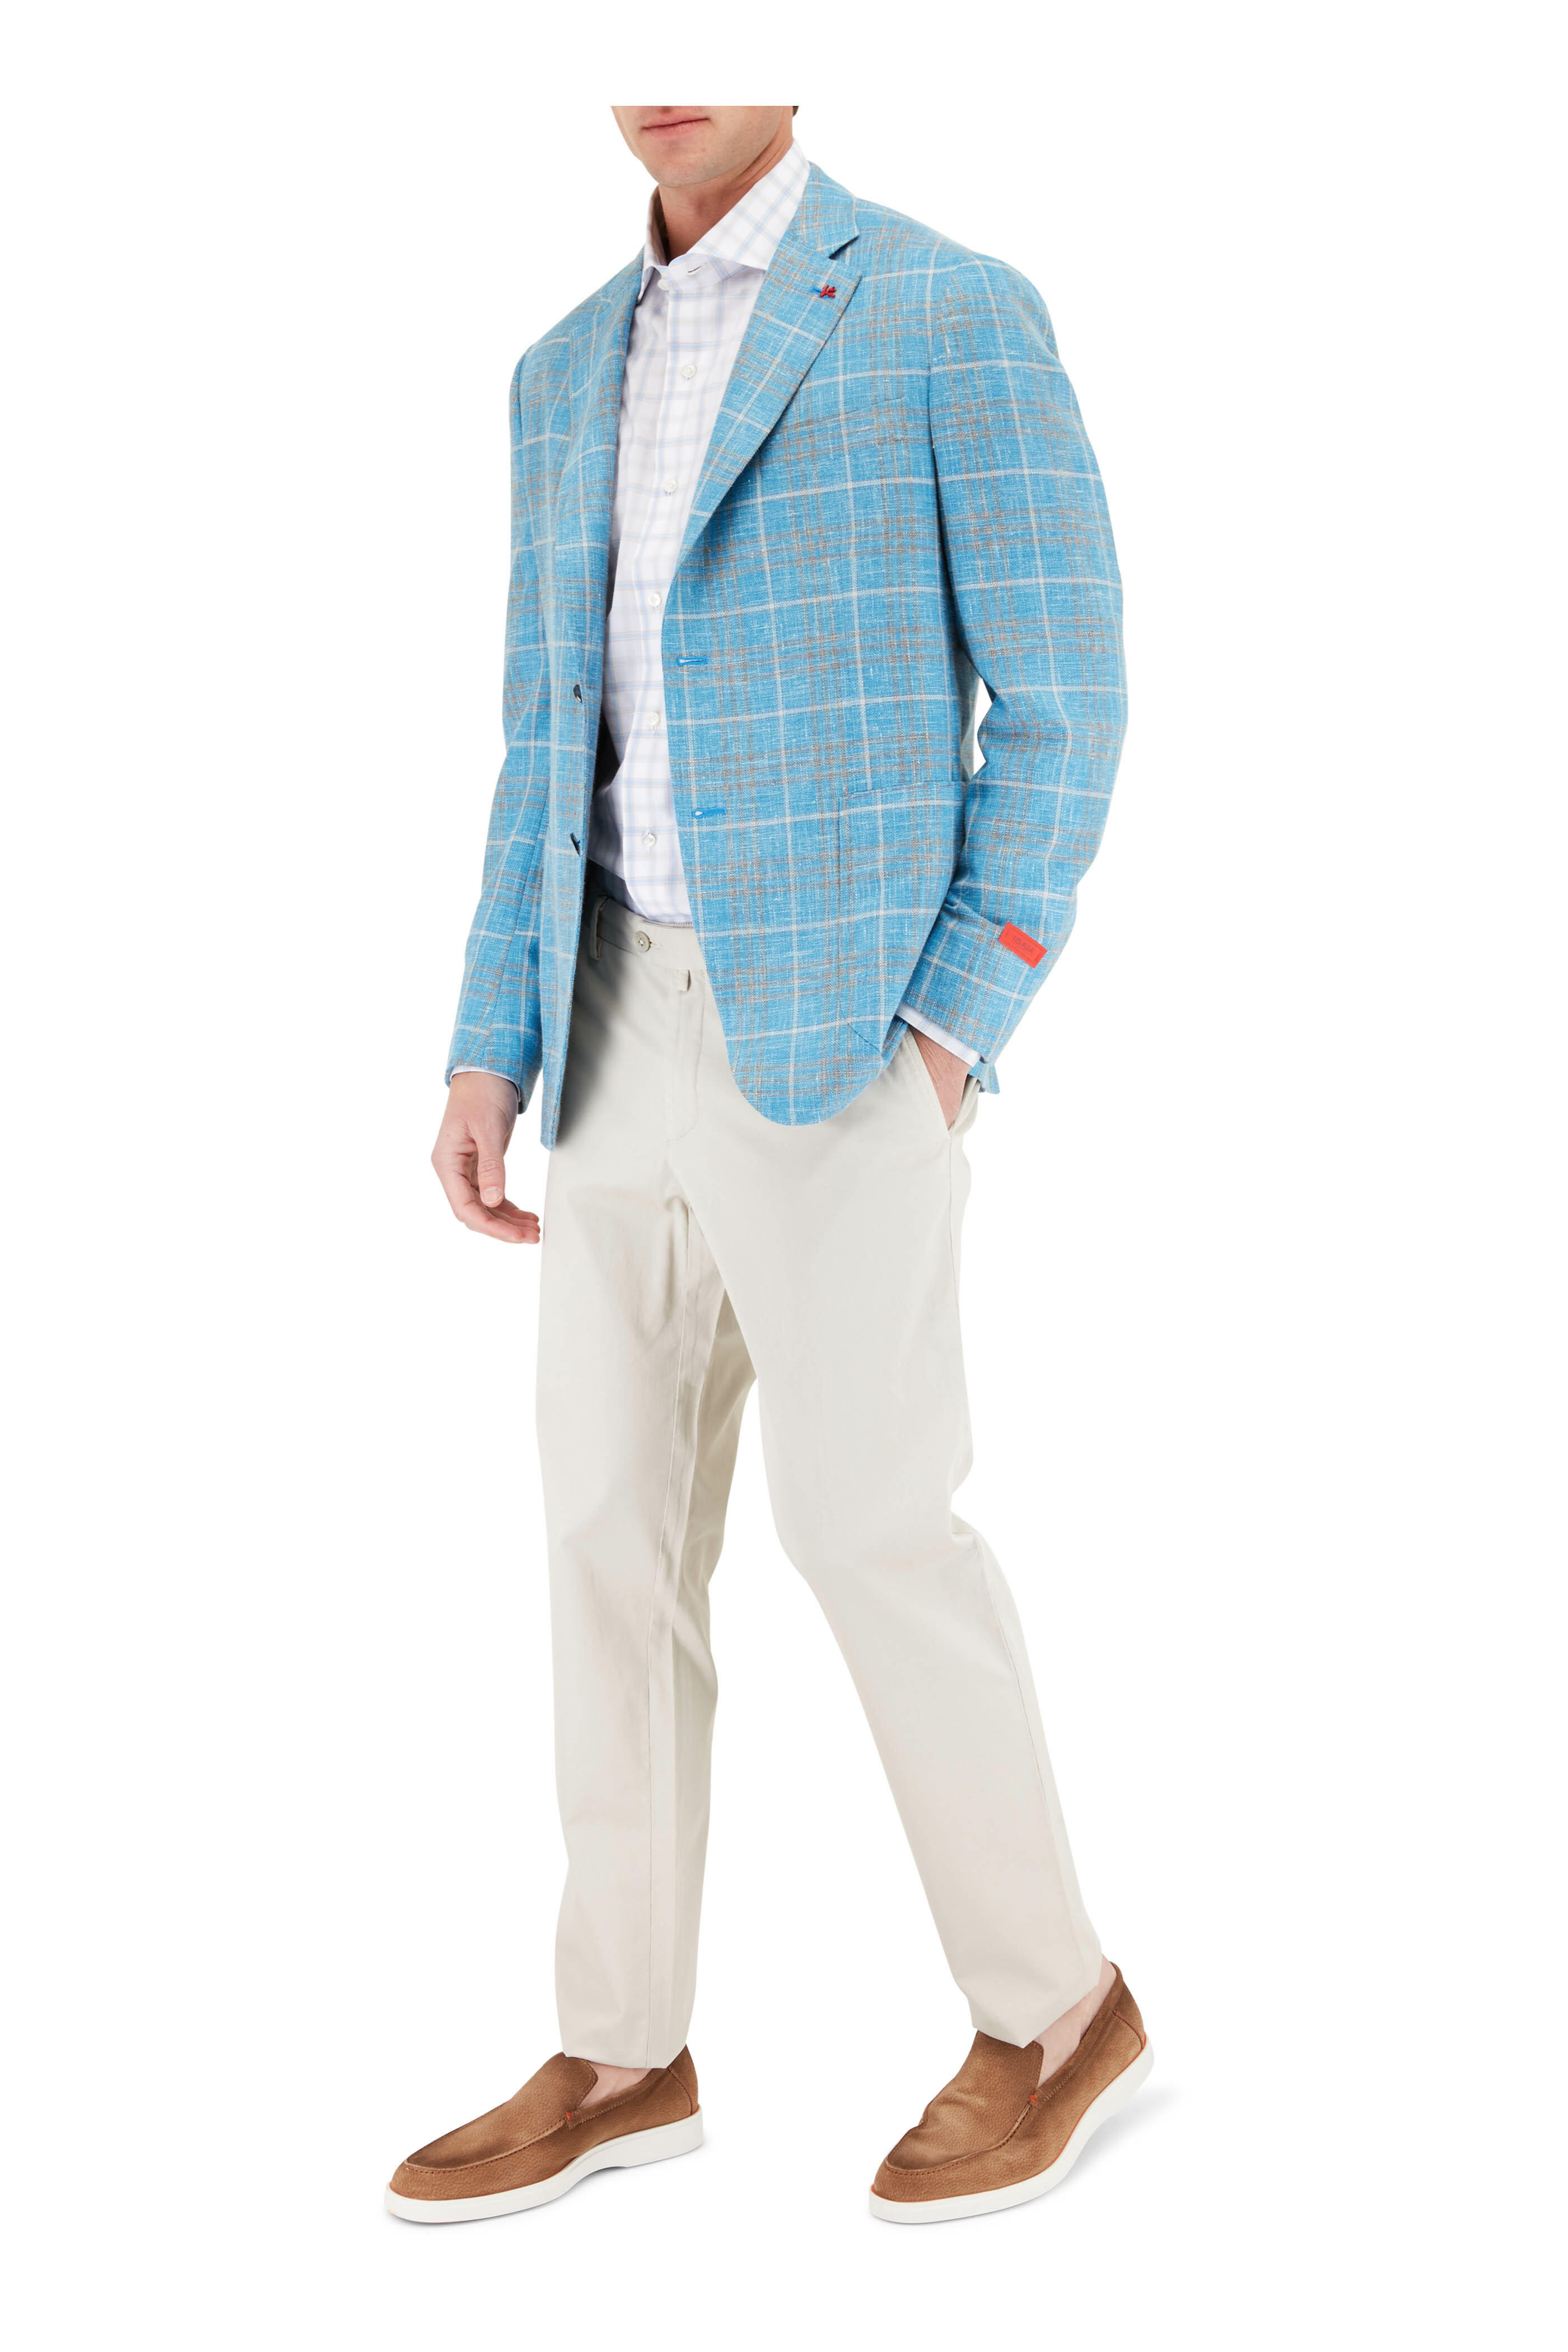 Isaia - Blue & White Check Hopsack Sportcoat | Mitchell Stores